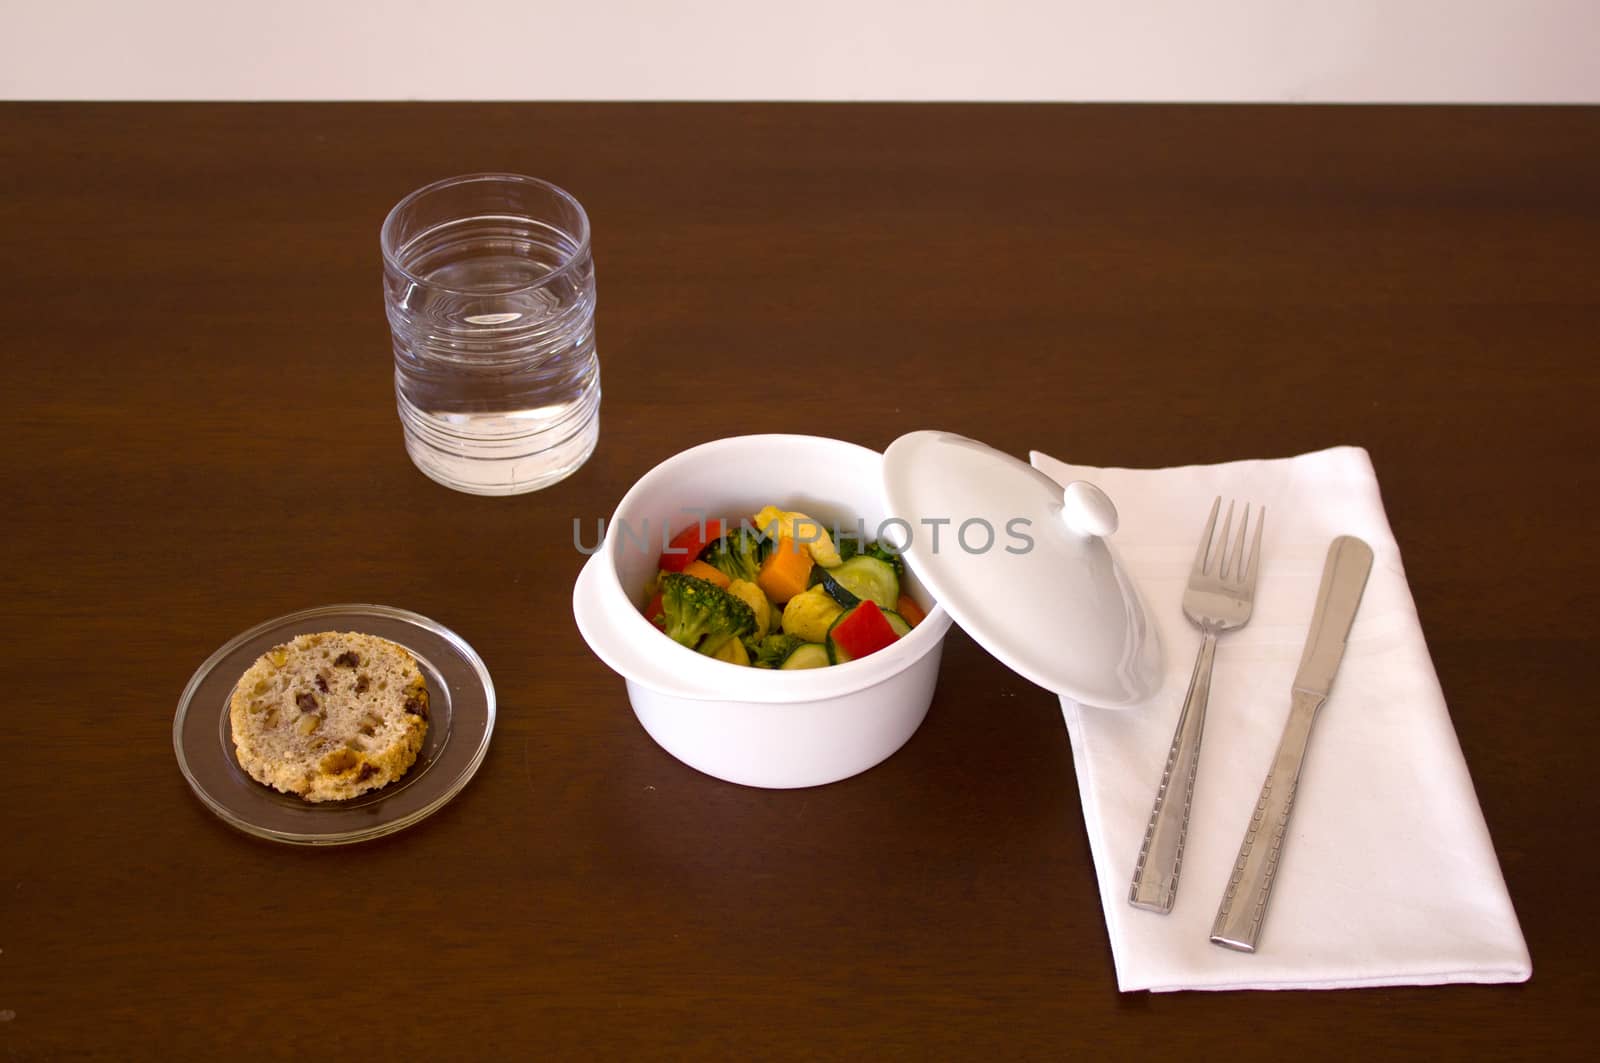 Main course dish, chicken with vegetables, bread, water knife, fork and towel